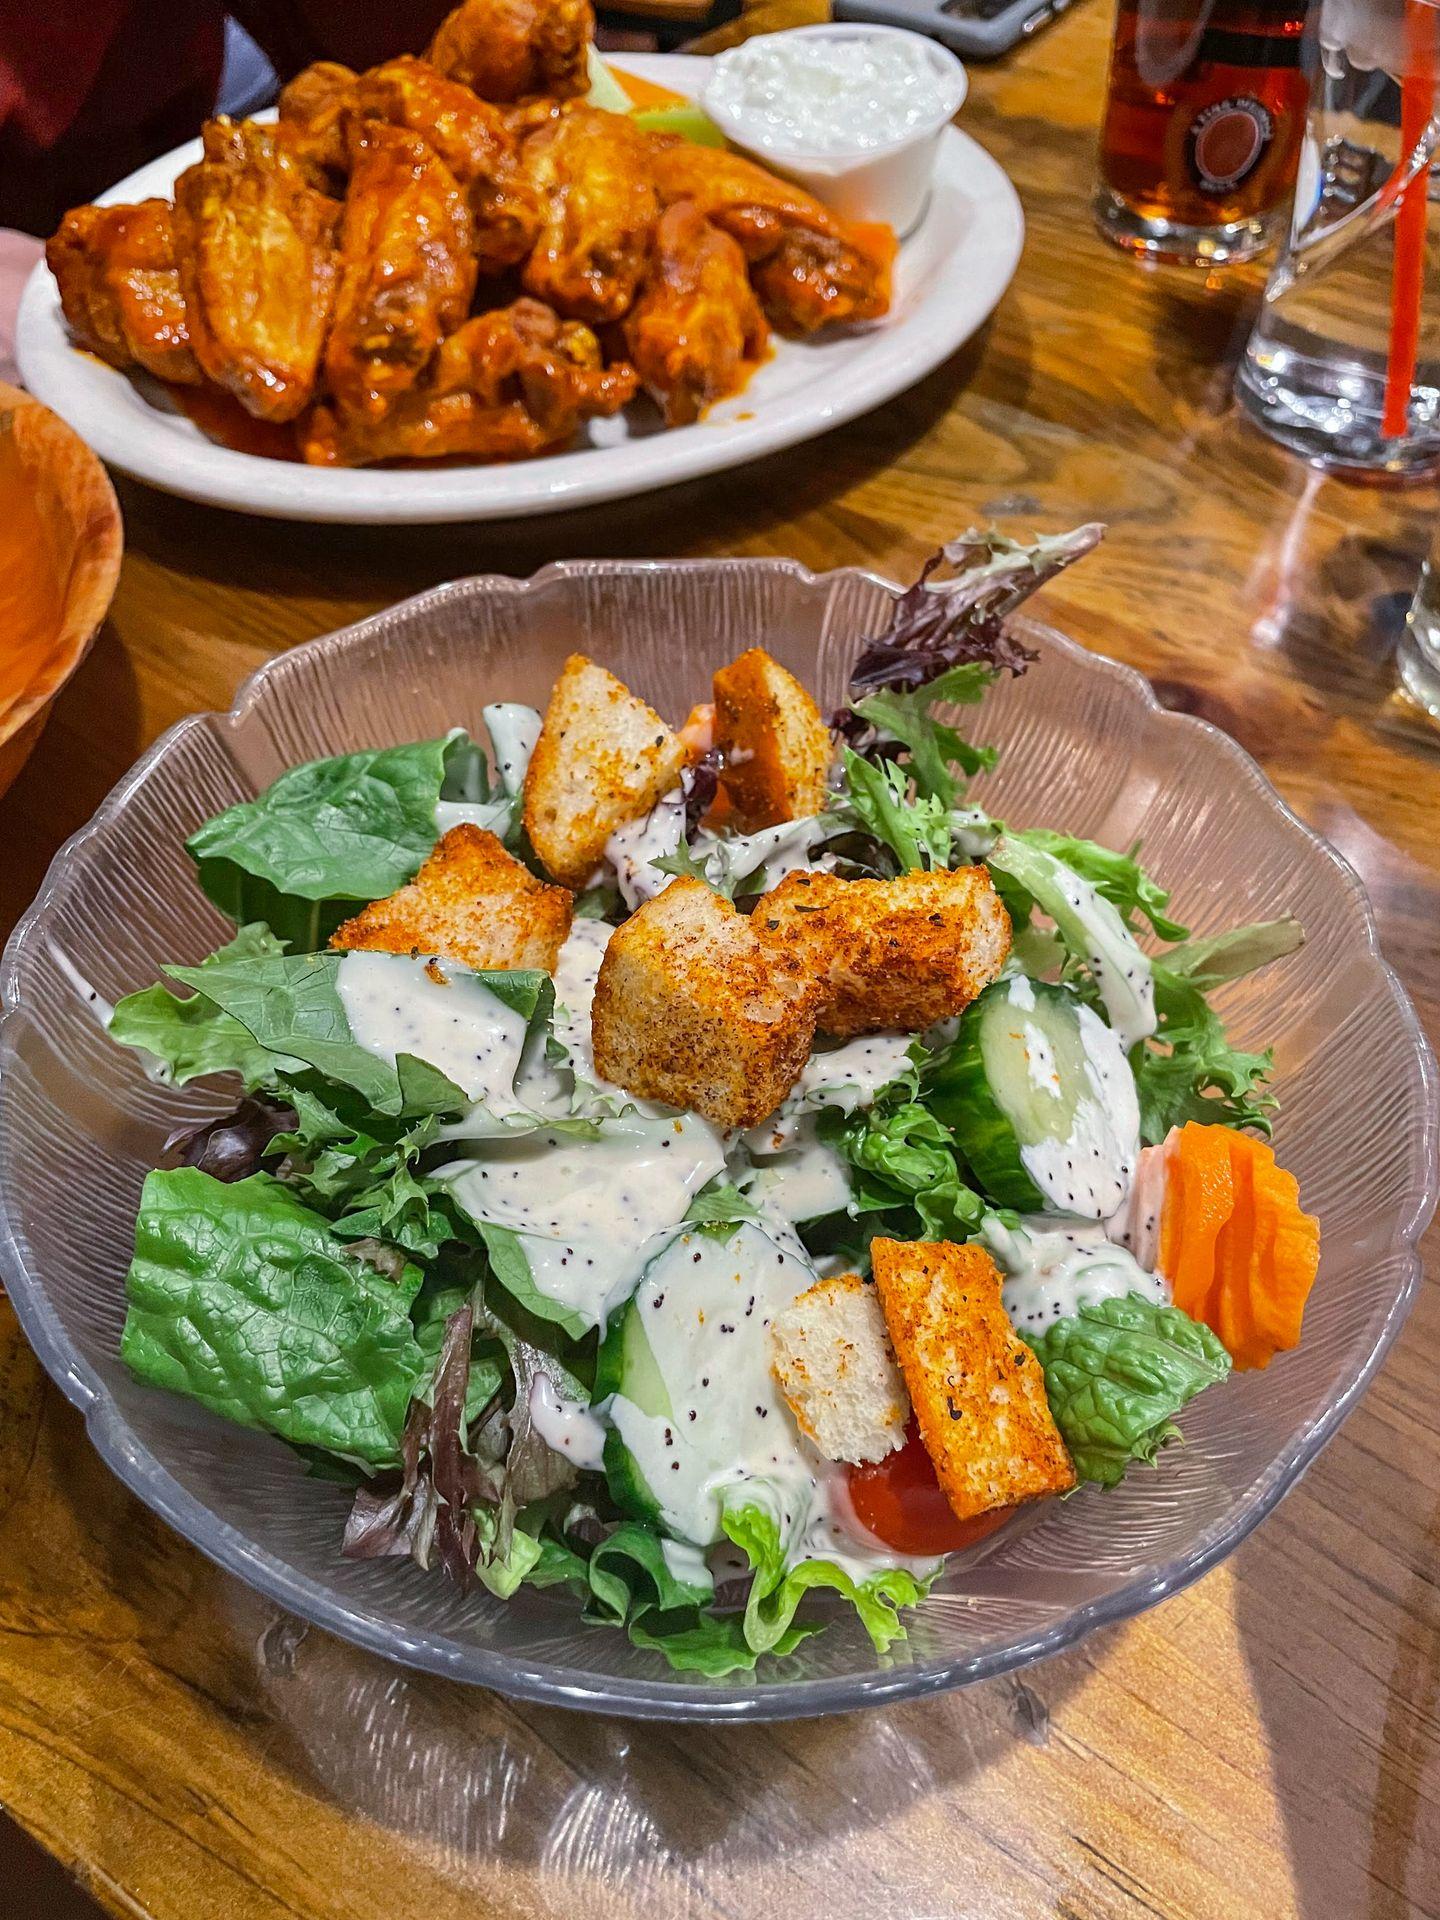 A salad with croutons and a plate of wings in the background.